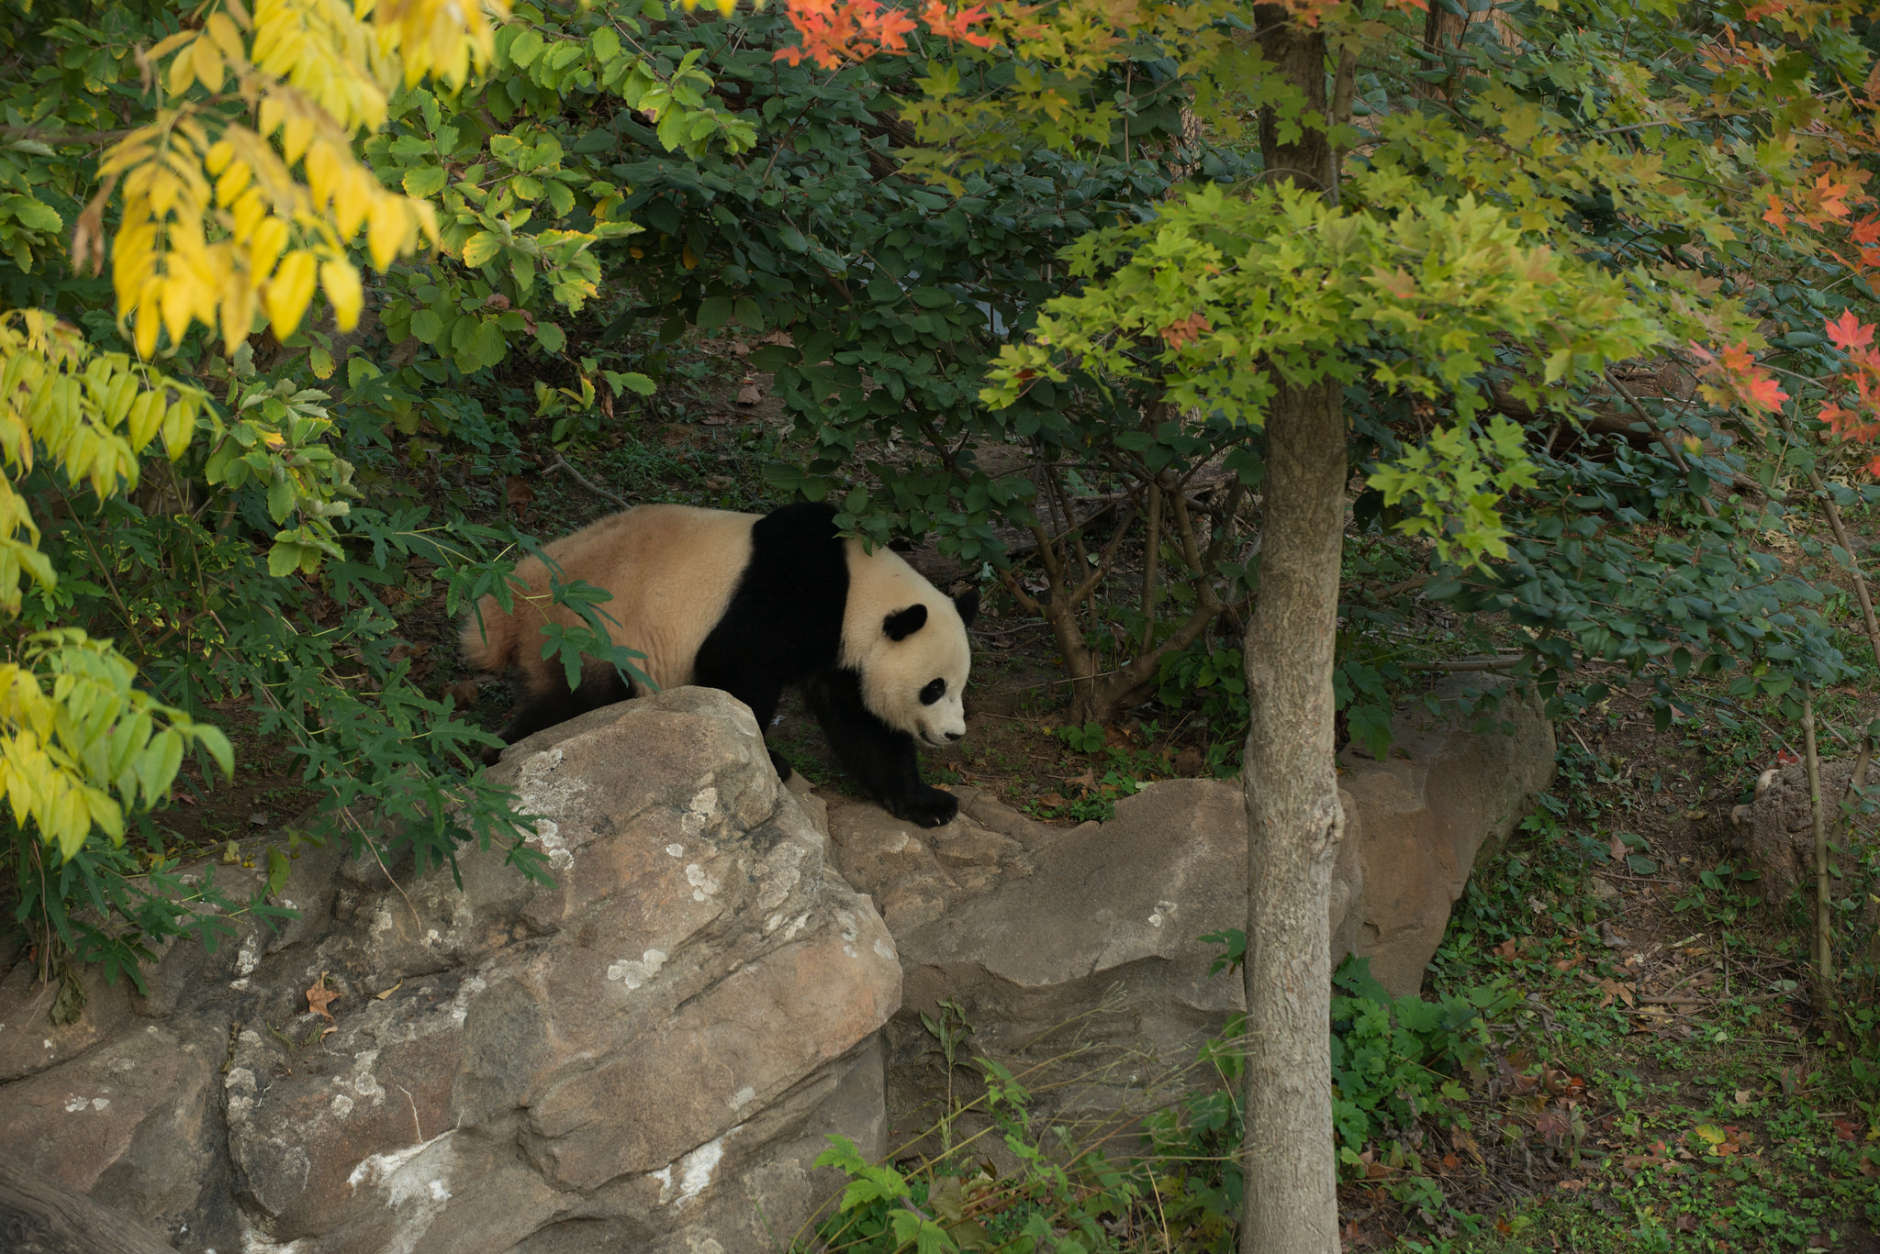 The panda will go to a facility where Smithsonian National Zookeepers say she will have plenty of space to roam and all the bamboo she wants. (Courtesy Smithsonian National Zoo)